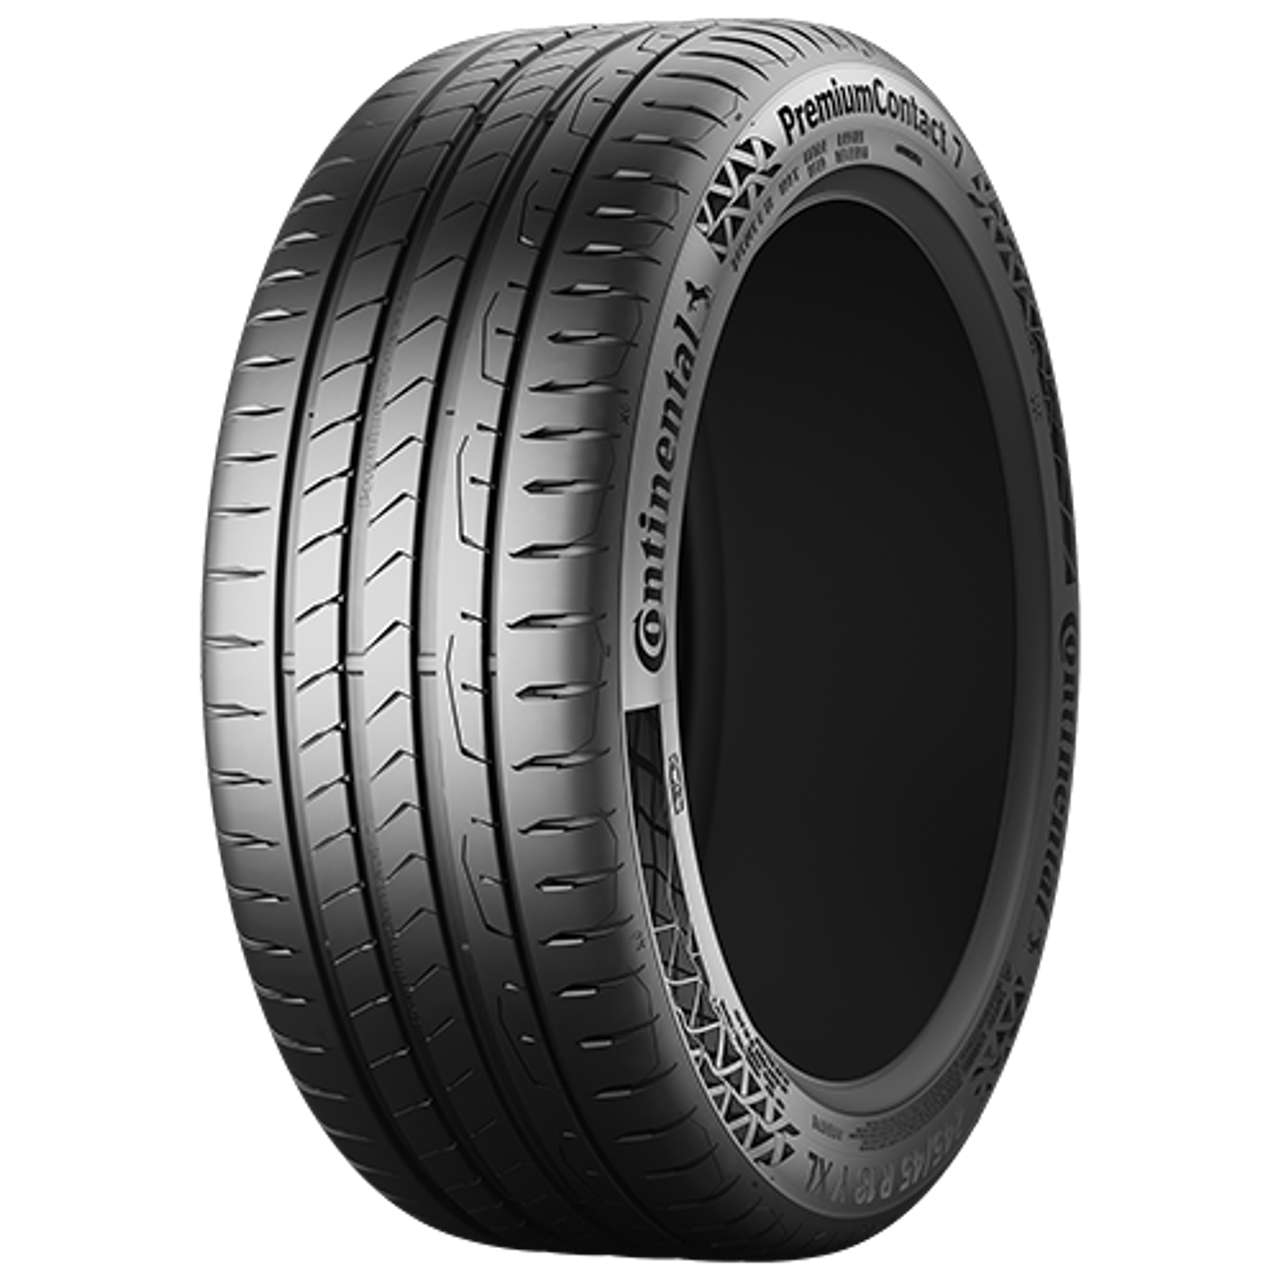 CONTINENTAL PREMIUMCONTACT 7 (EVc) 215/60R17 96V FR BSW